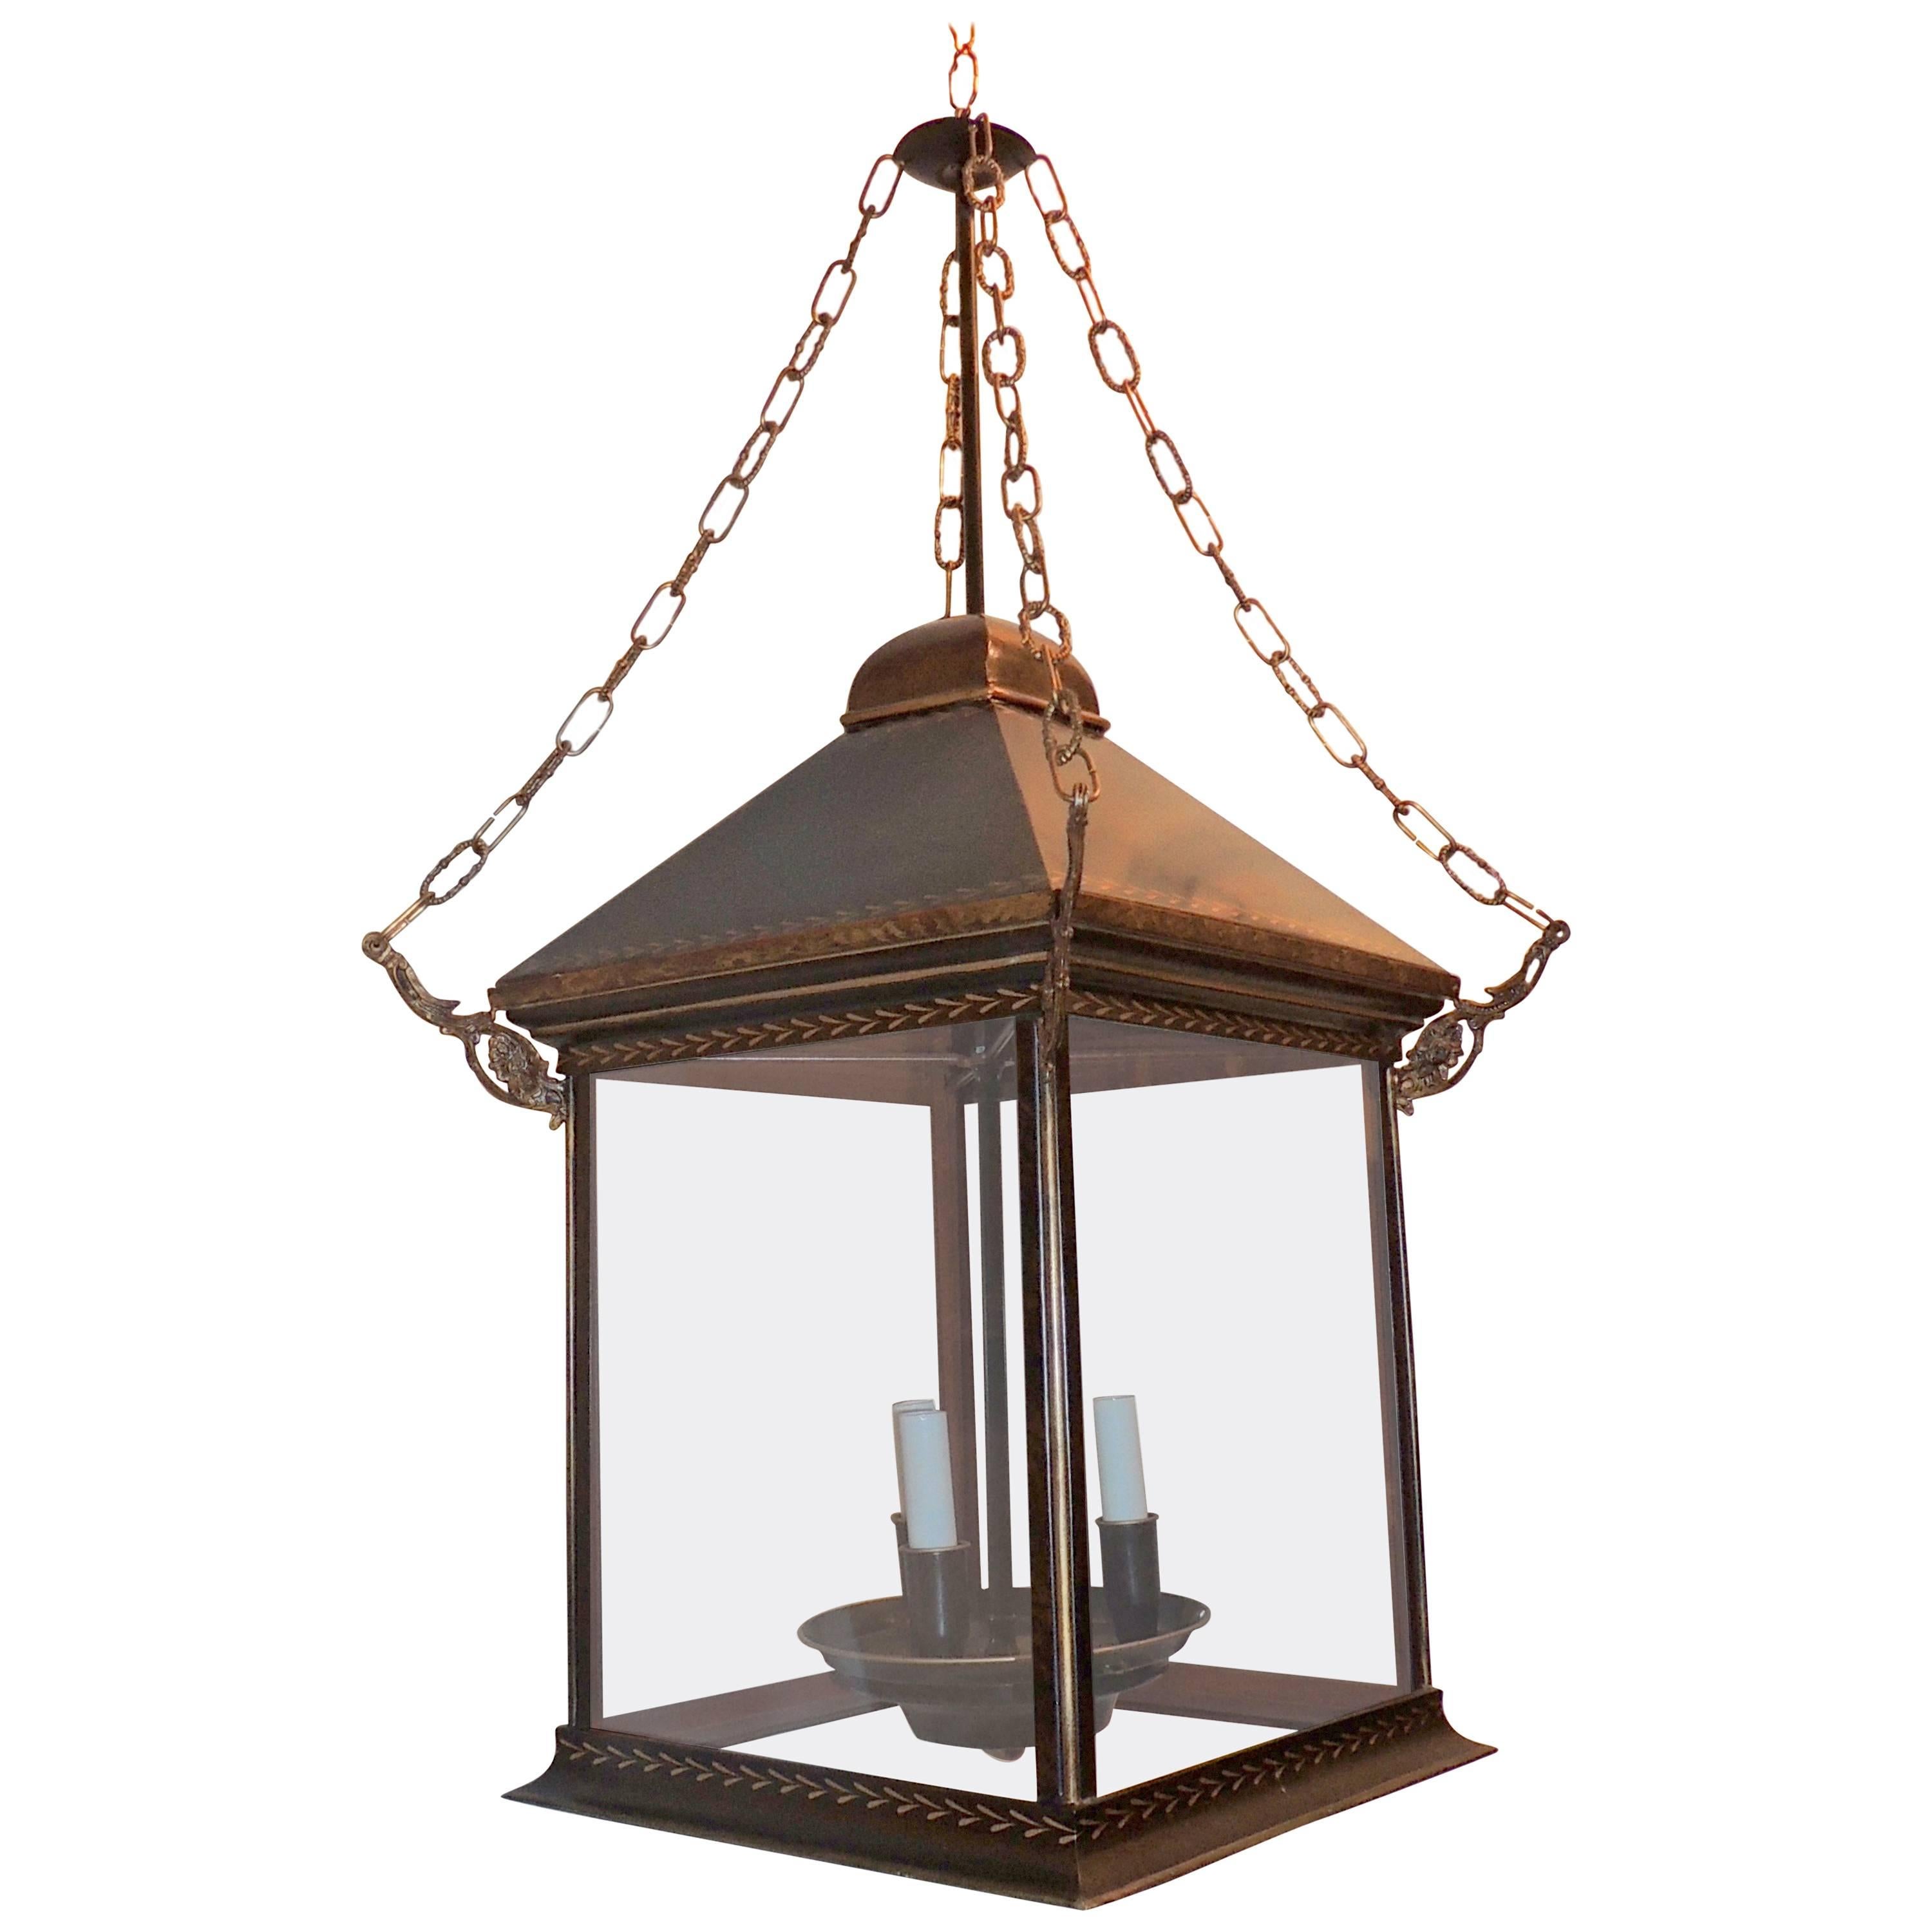 Tole Brown Distressed Leather Gilt Three-Light Glass Lantern Pendent Fixture